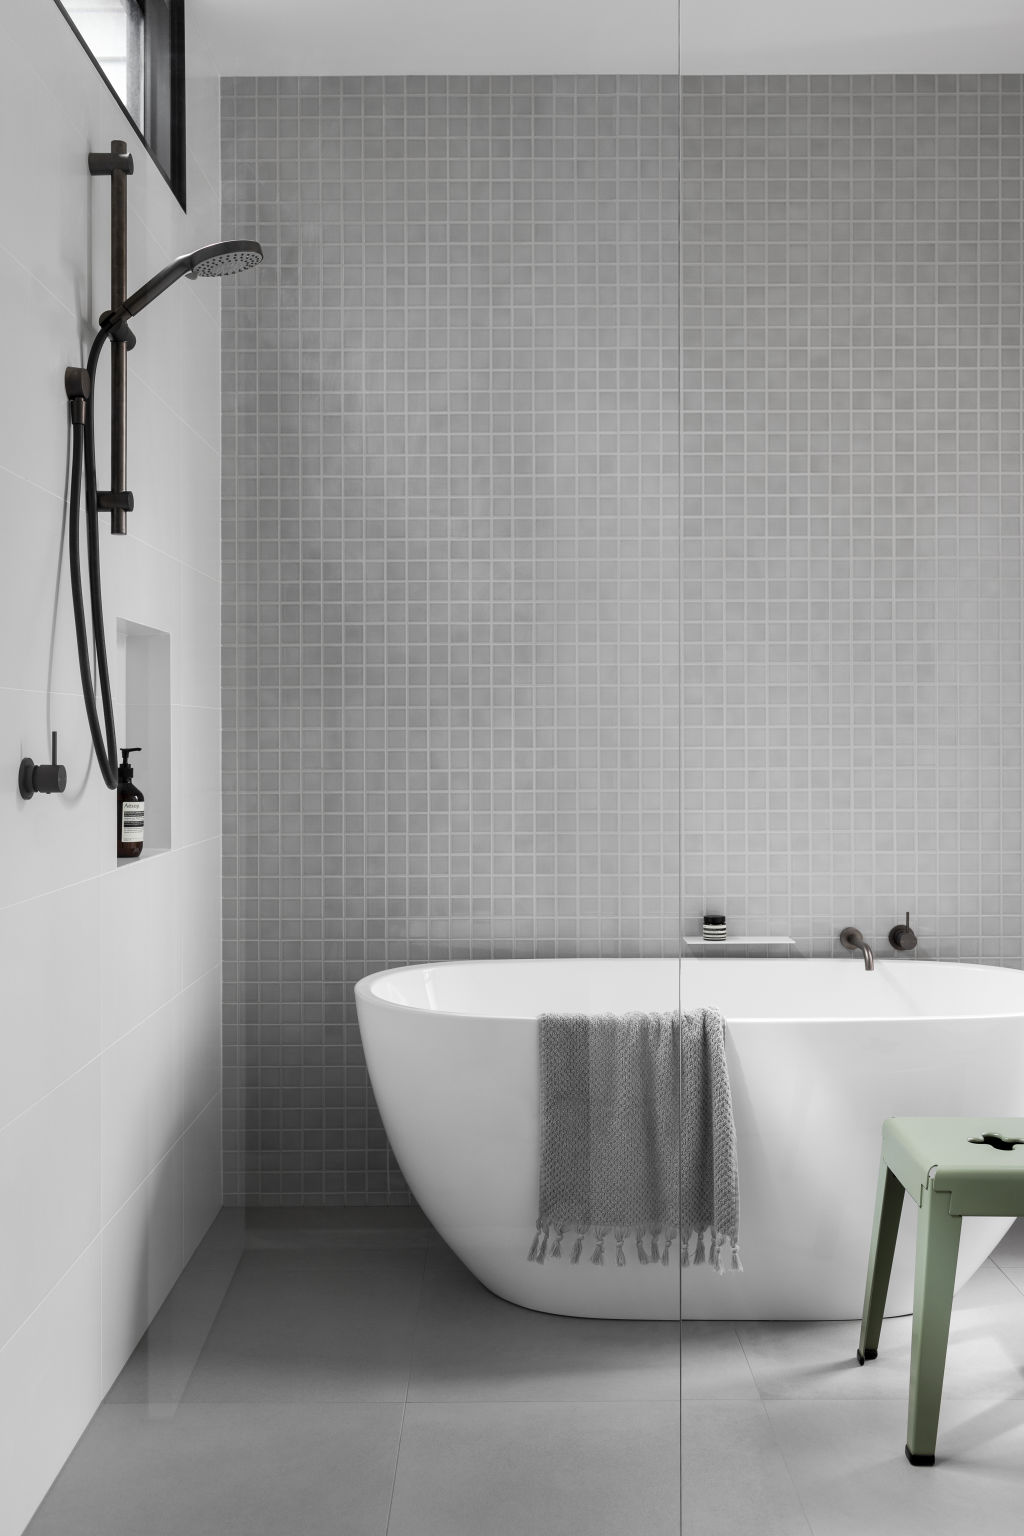 For a luxurious touch in your bathroom, opt for a freestanding tub. Richmond house by Heartly interior design studio. Photo: Martina Gemmola